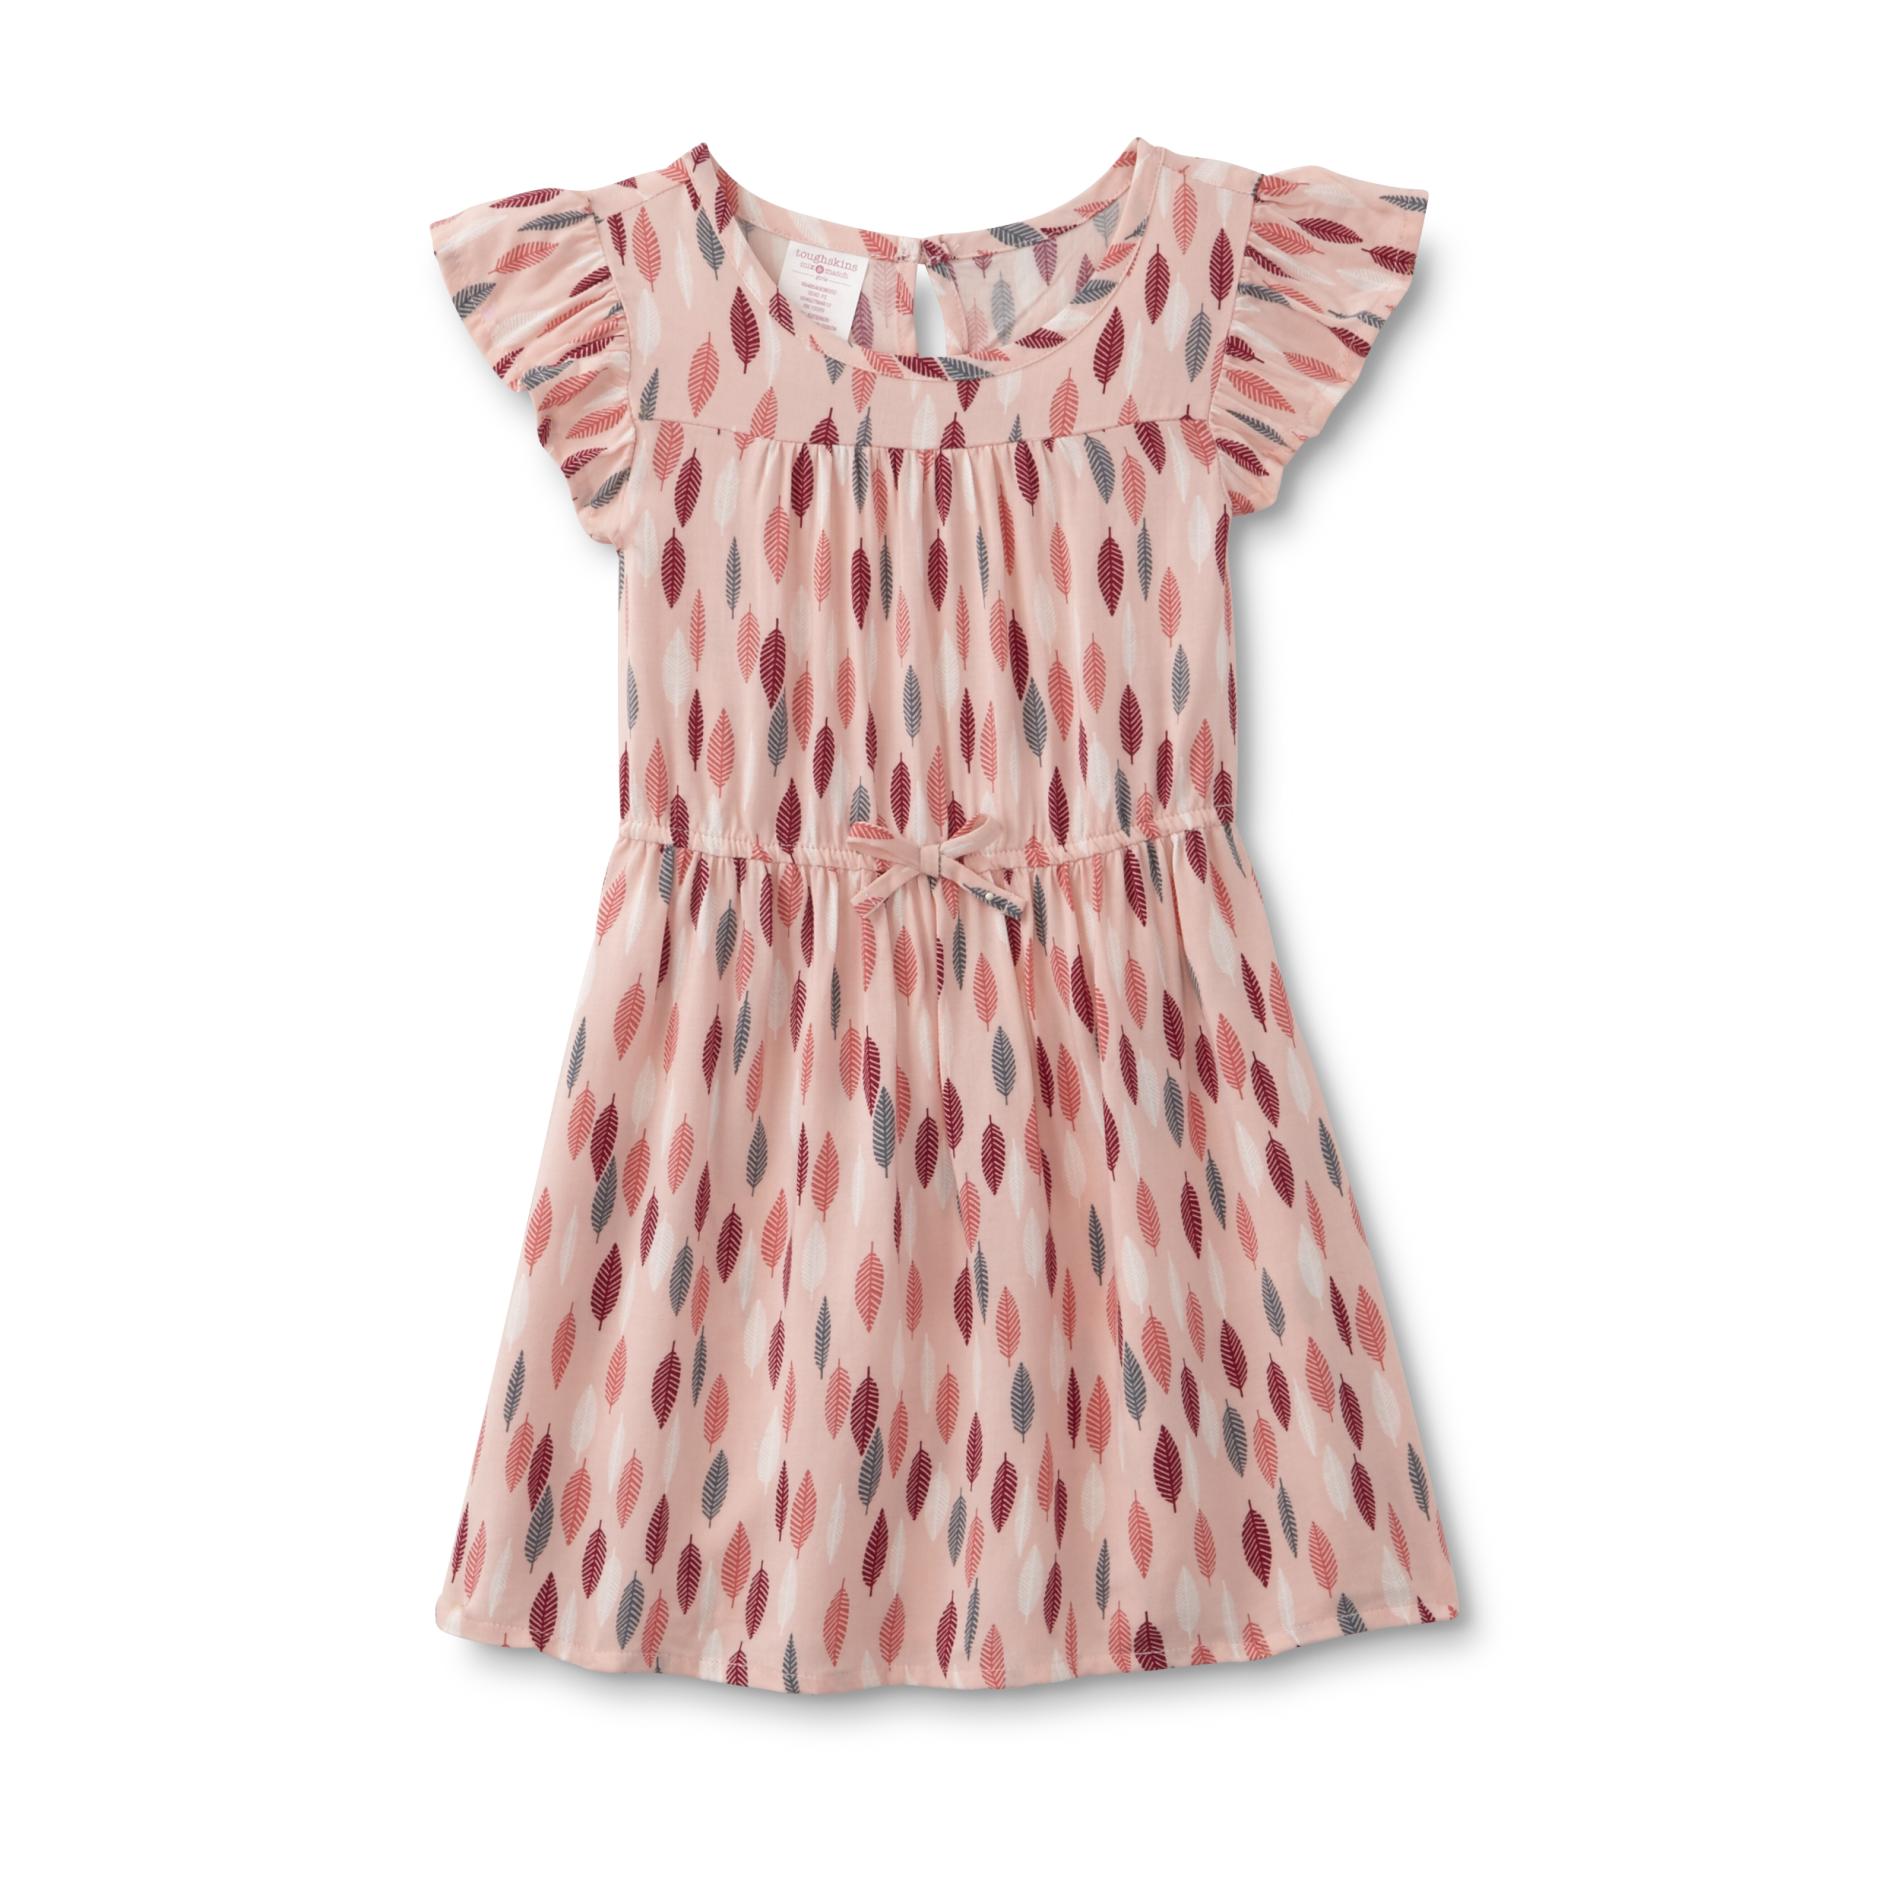 Toughskins Infant & Toddler Girl's Dress - Feathers